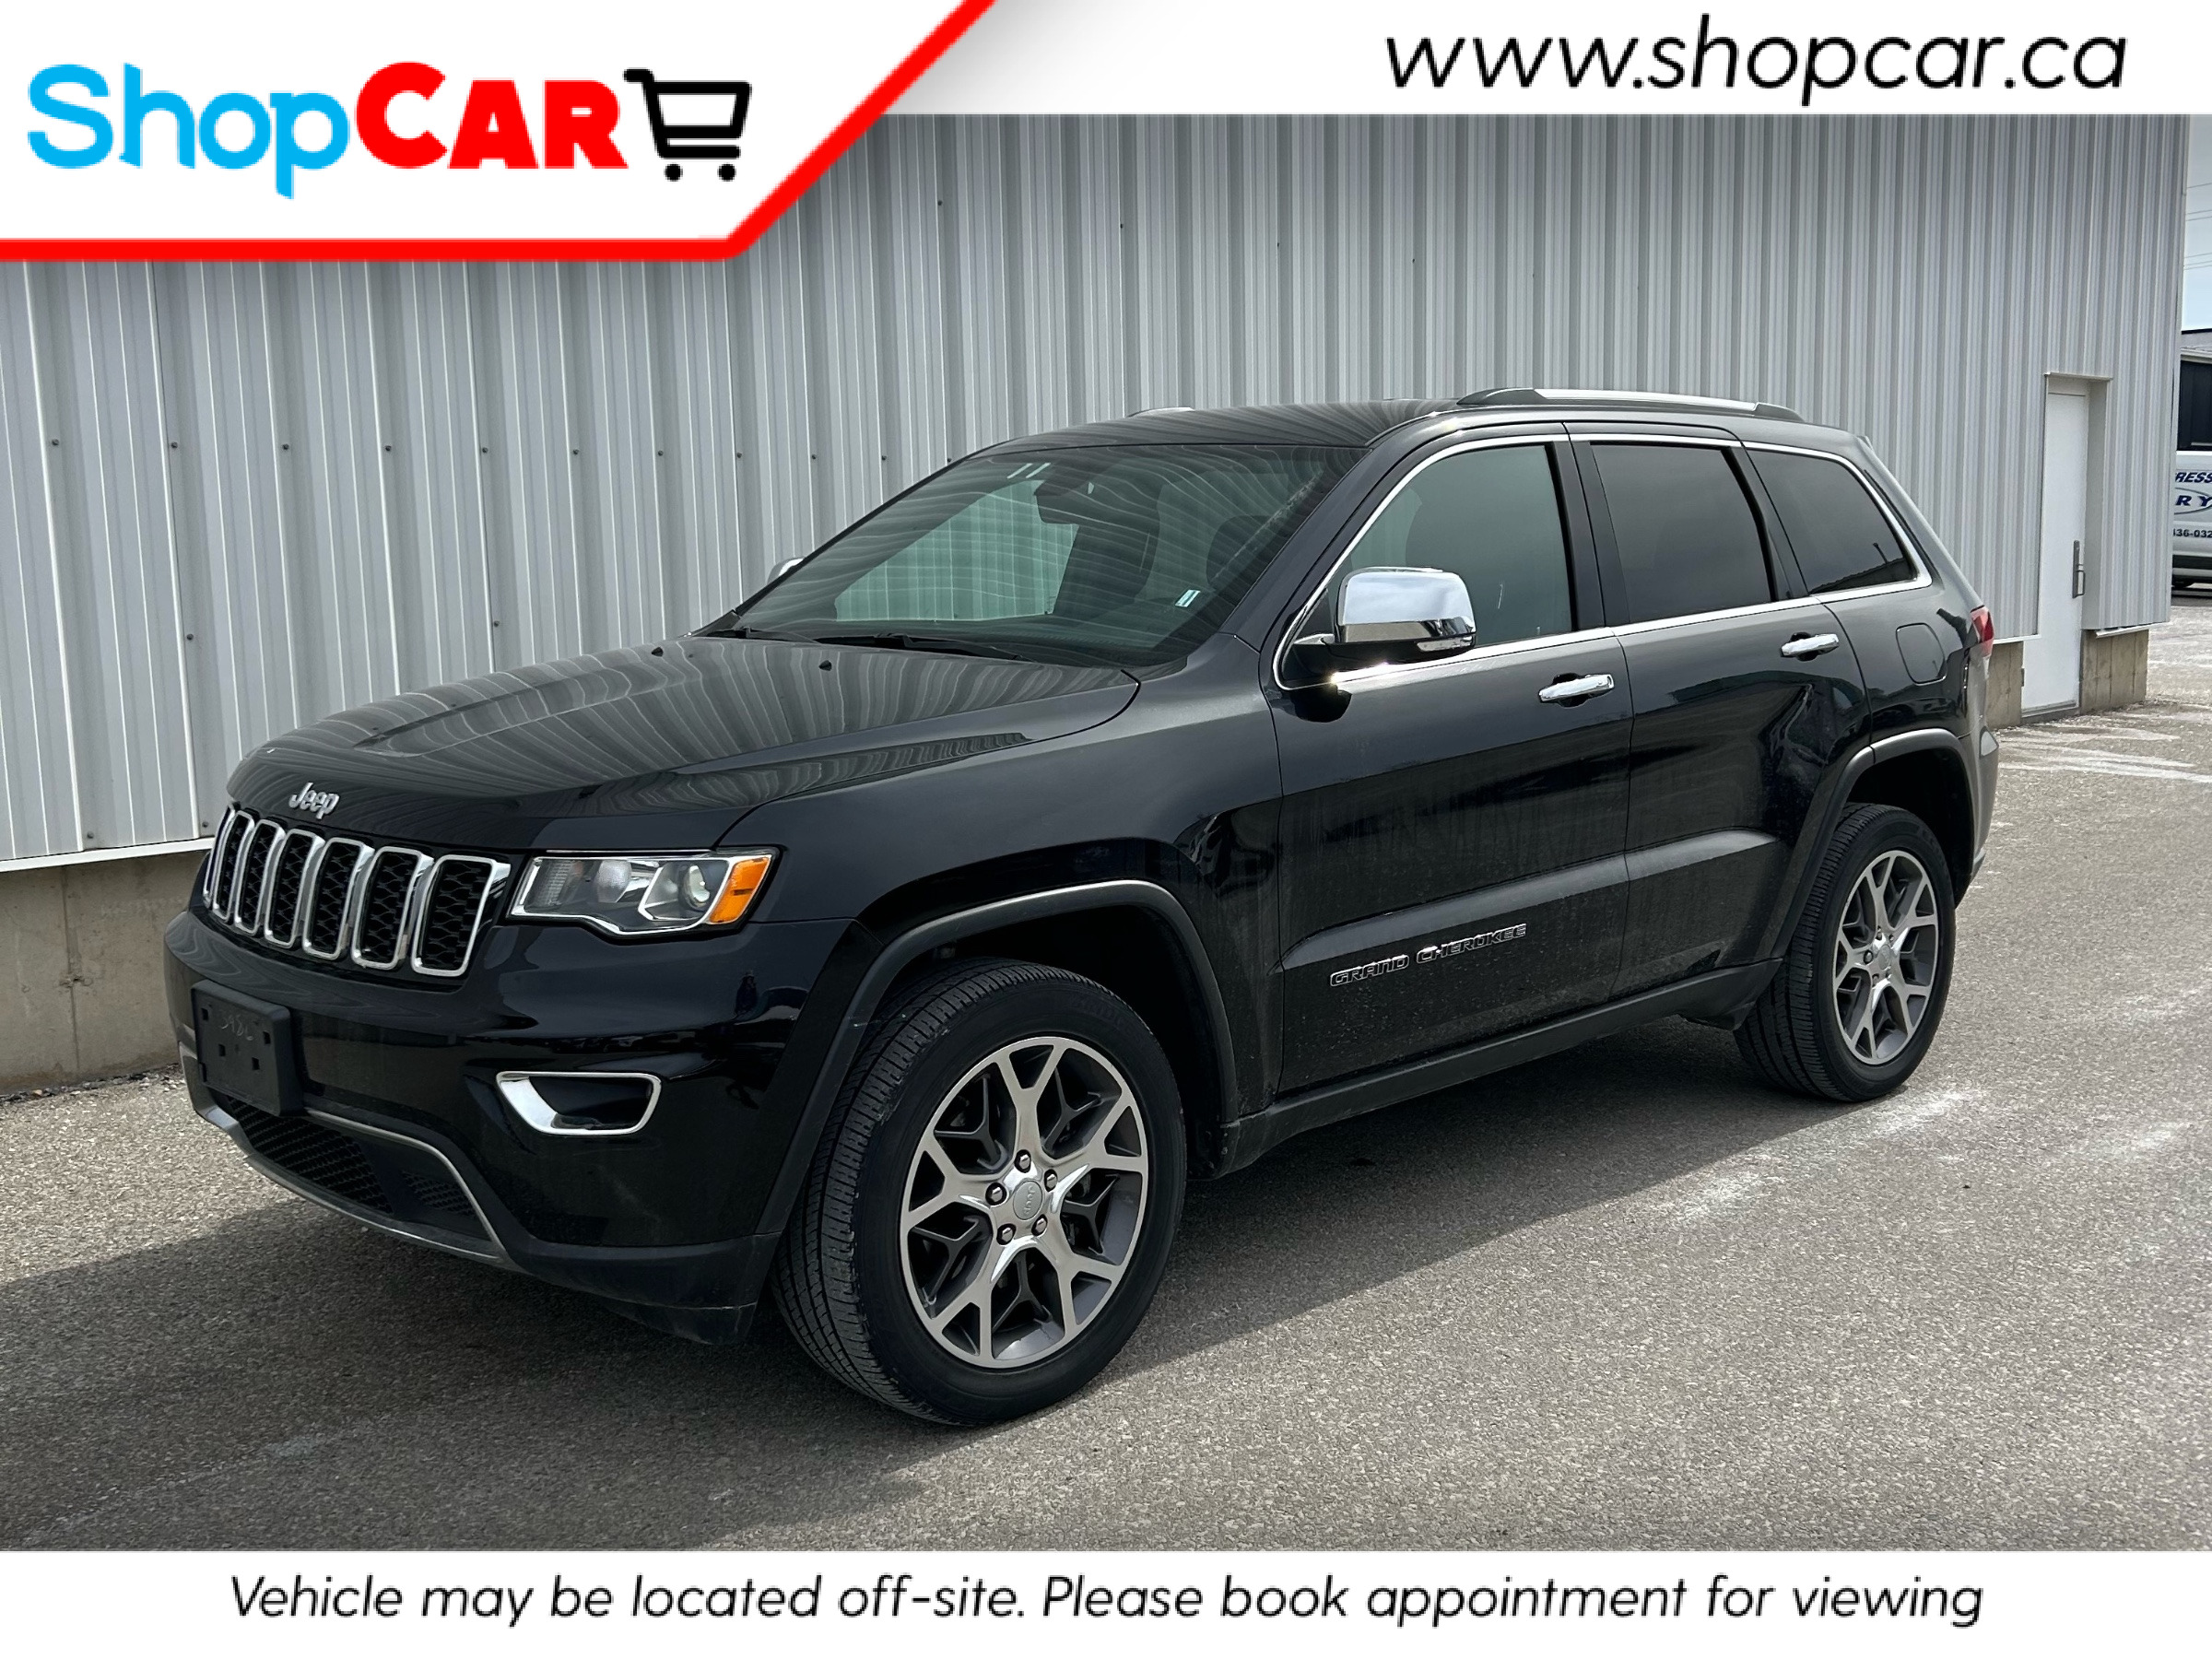 2021 Jeep Grand Cherokee Price Reduction | Low KMs | AWD | Leather